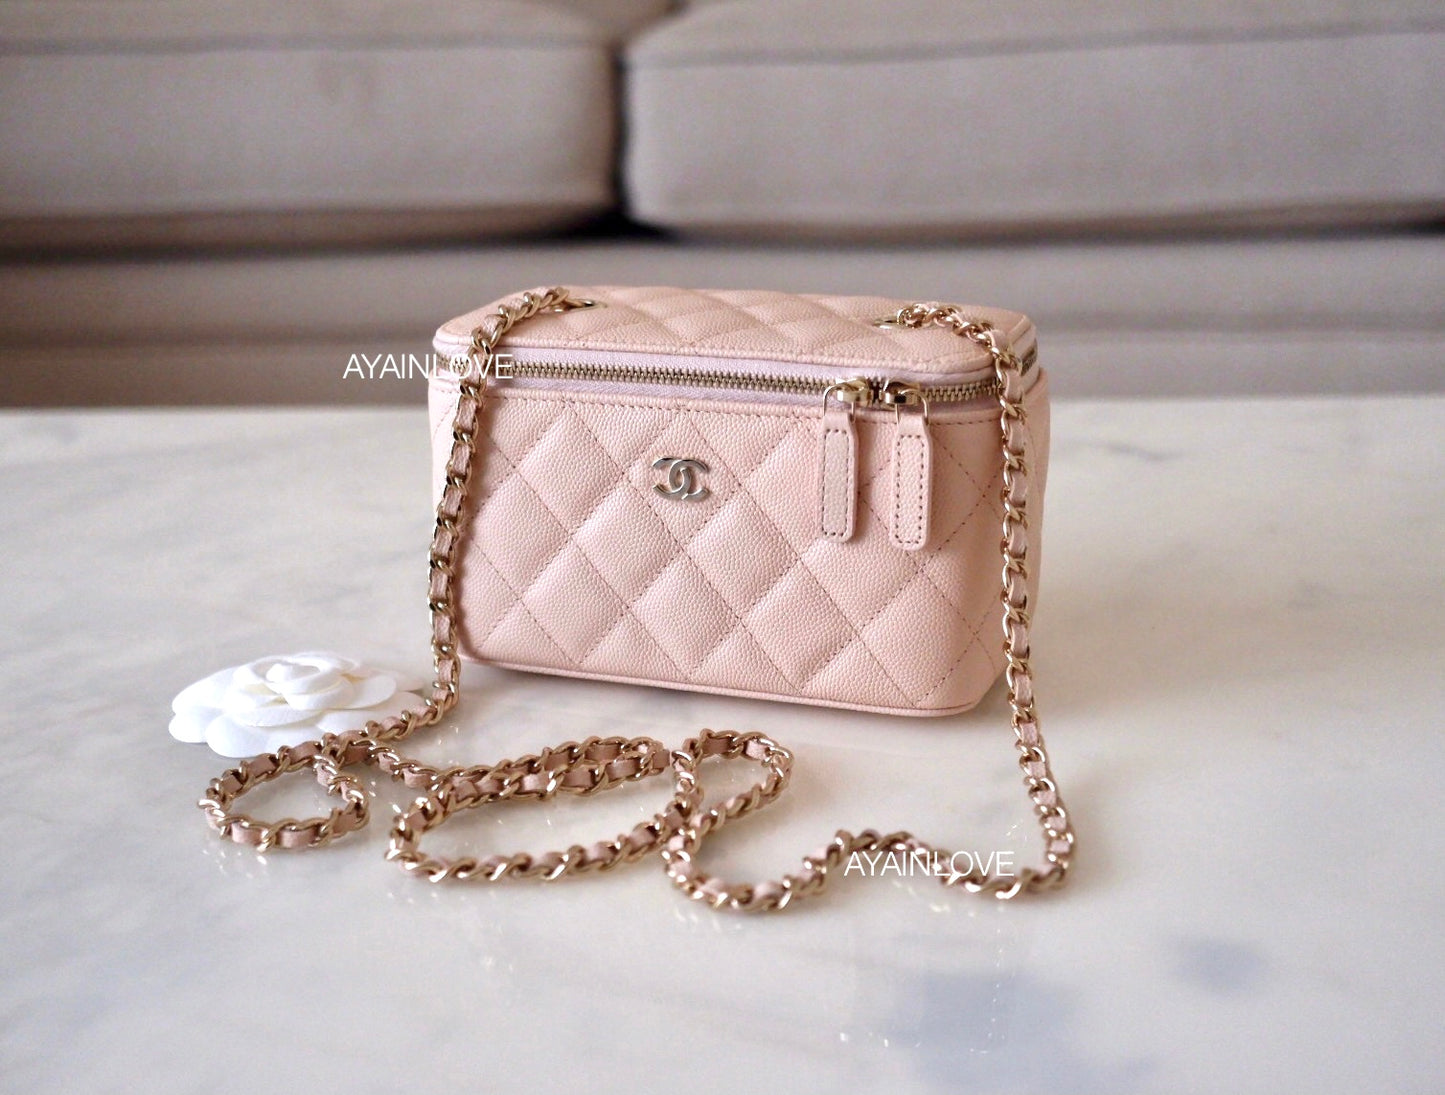 CHANEL Caviar Quilted Mini Vanity Case With Chain Light Pink, FASHIONPHILE